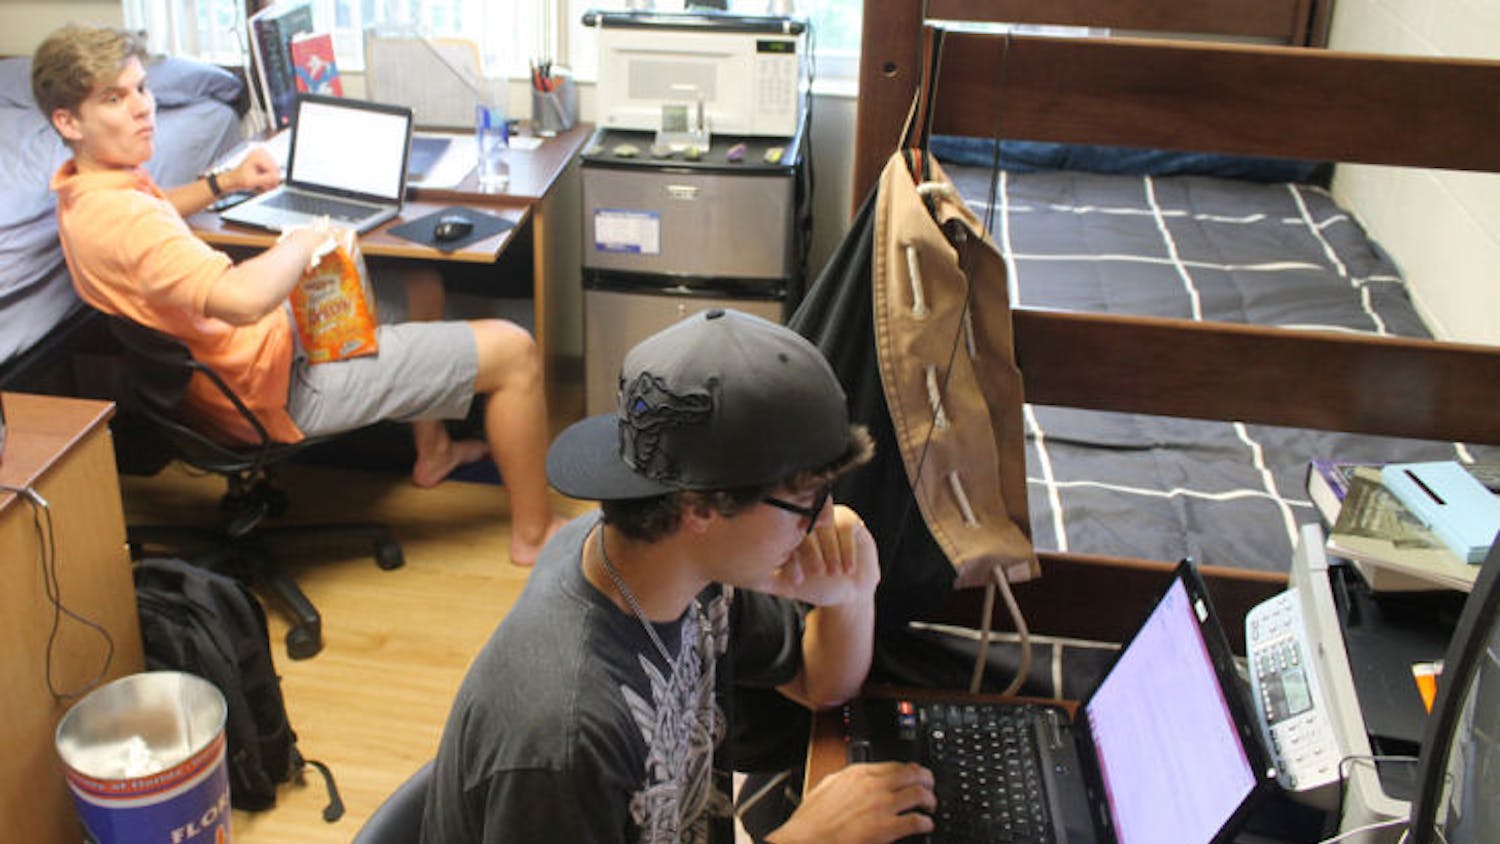 Animal science sophomore Justin Hanson, 19, right, and engineering freshman William Walker, 18, left, pass time in their dorm room Monday afternoon in Simpson Hall.